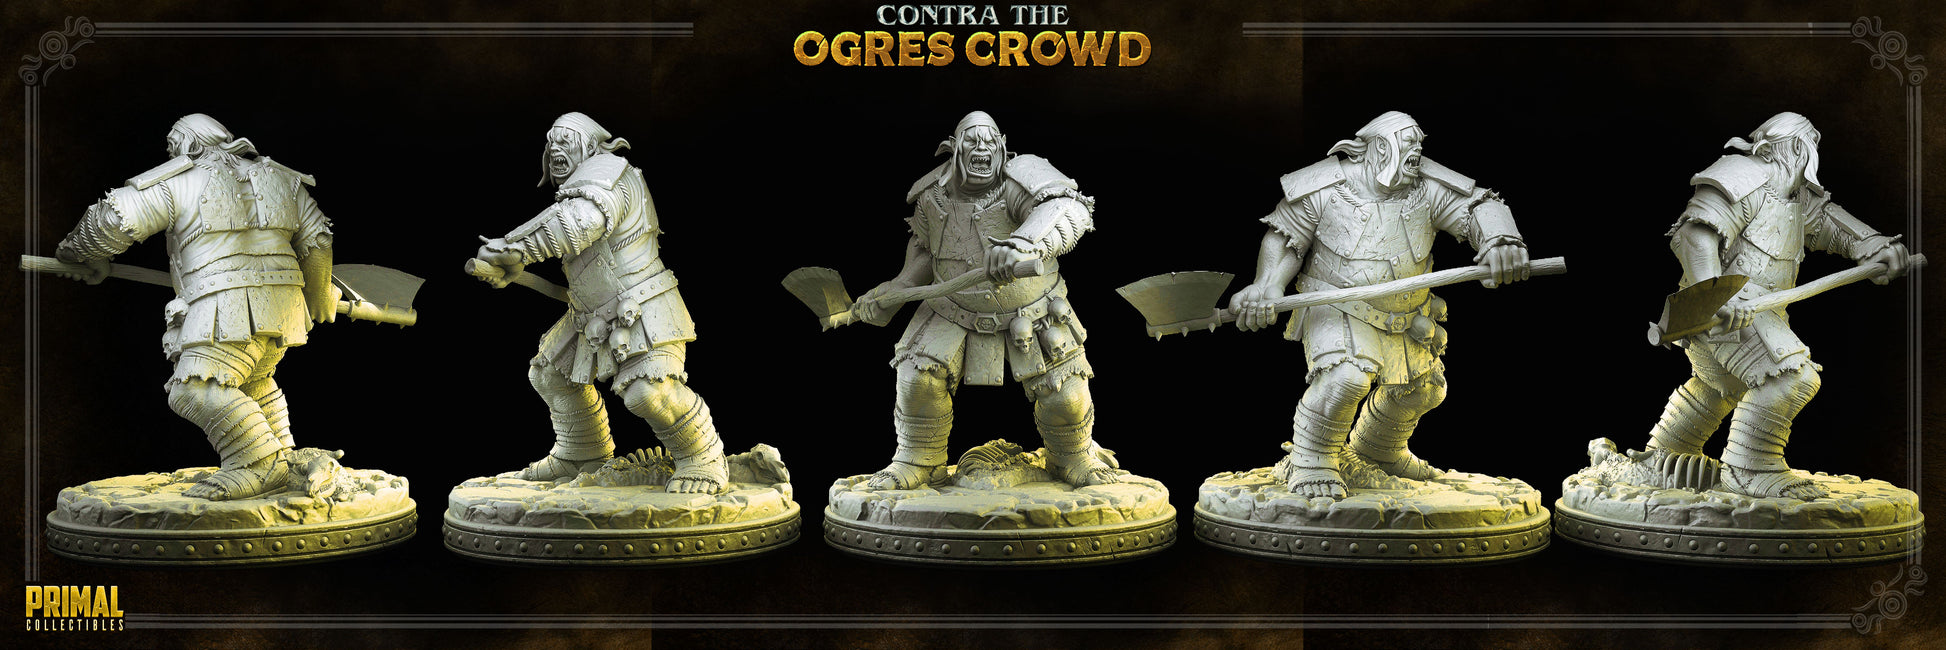 Ulbrok Ogre Champion | DnD Character Miniature | PRIMAL Collectibles - Tattles Told 3D